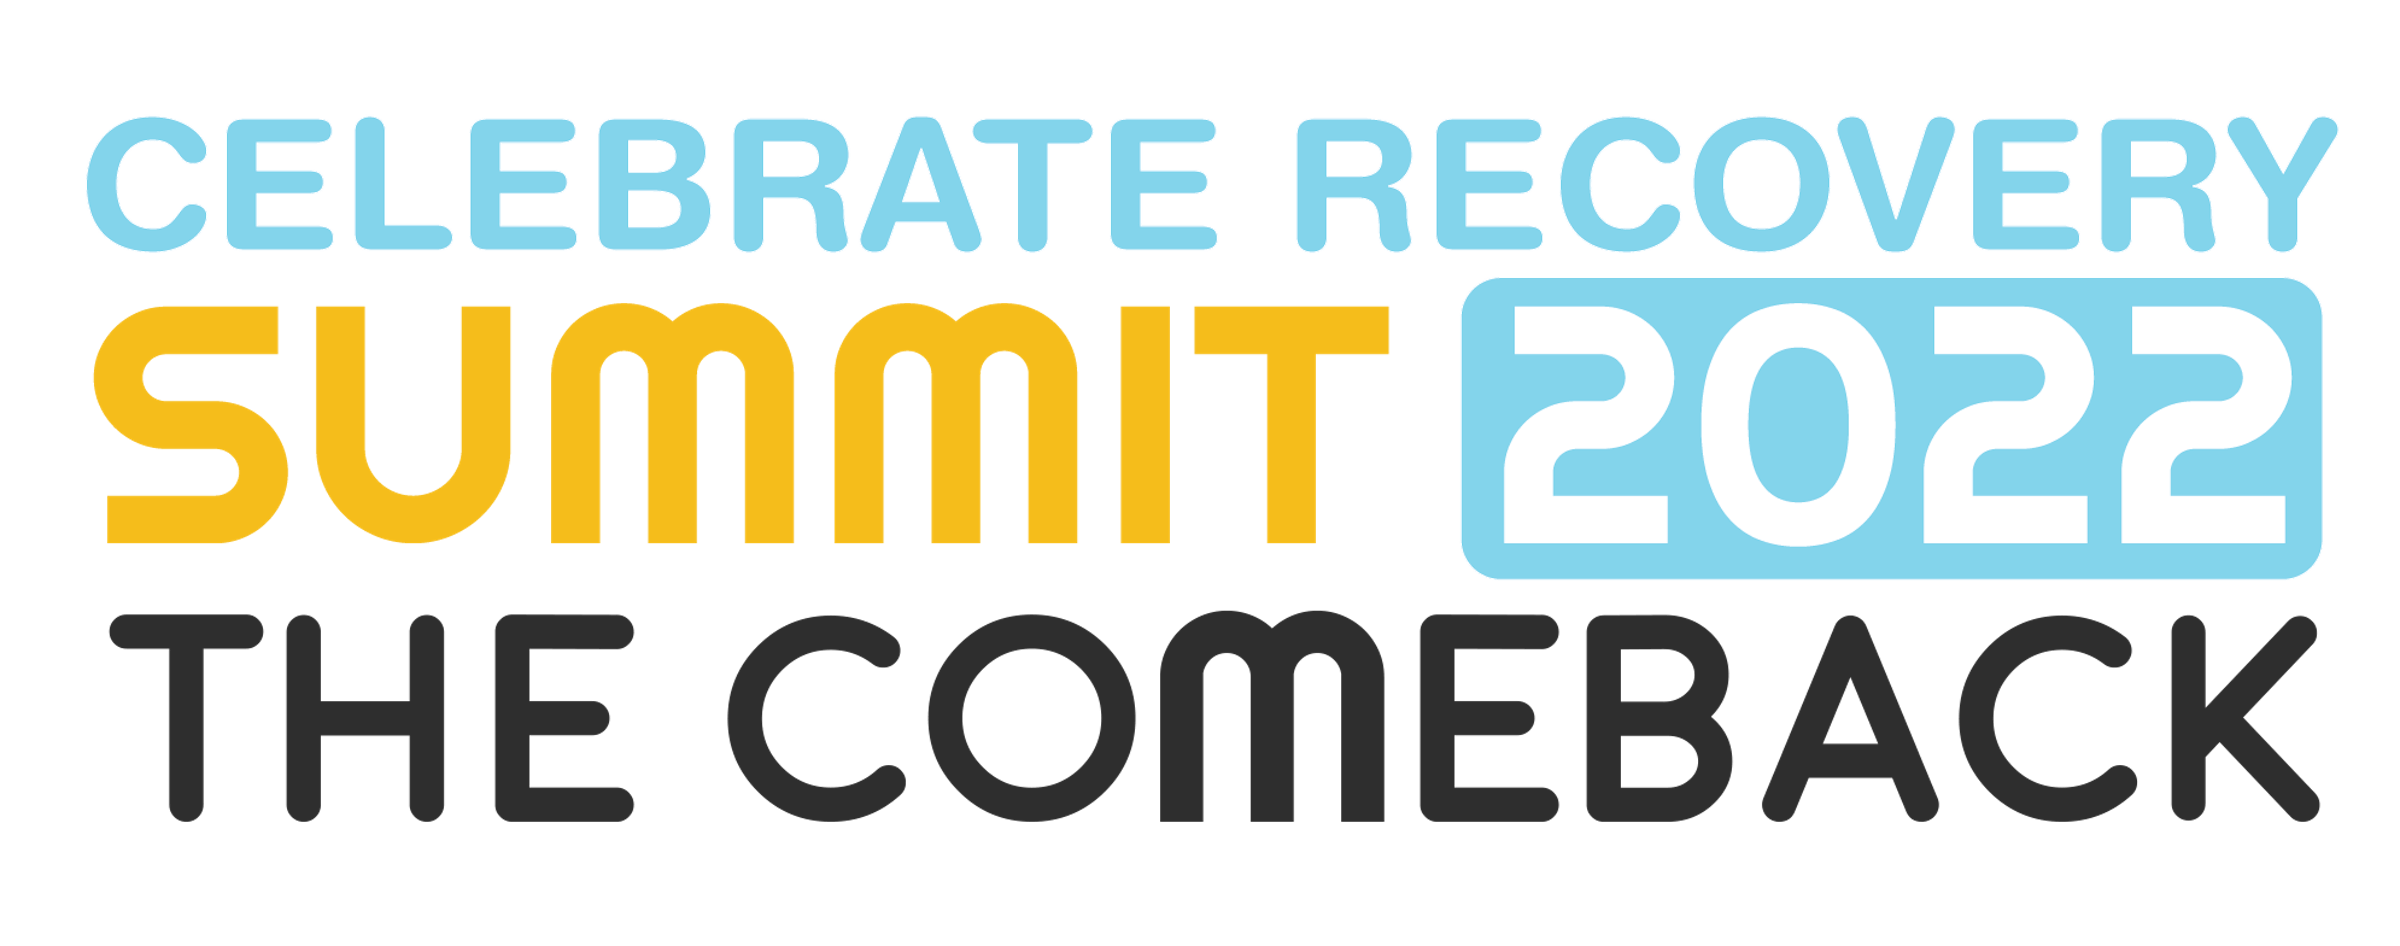 The 2022 Celebrate Recovery Summit!